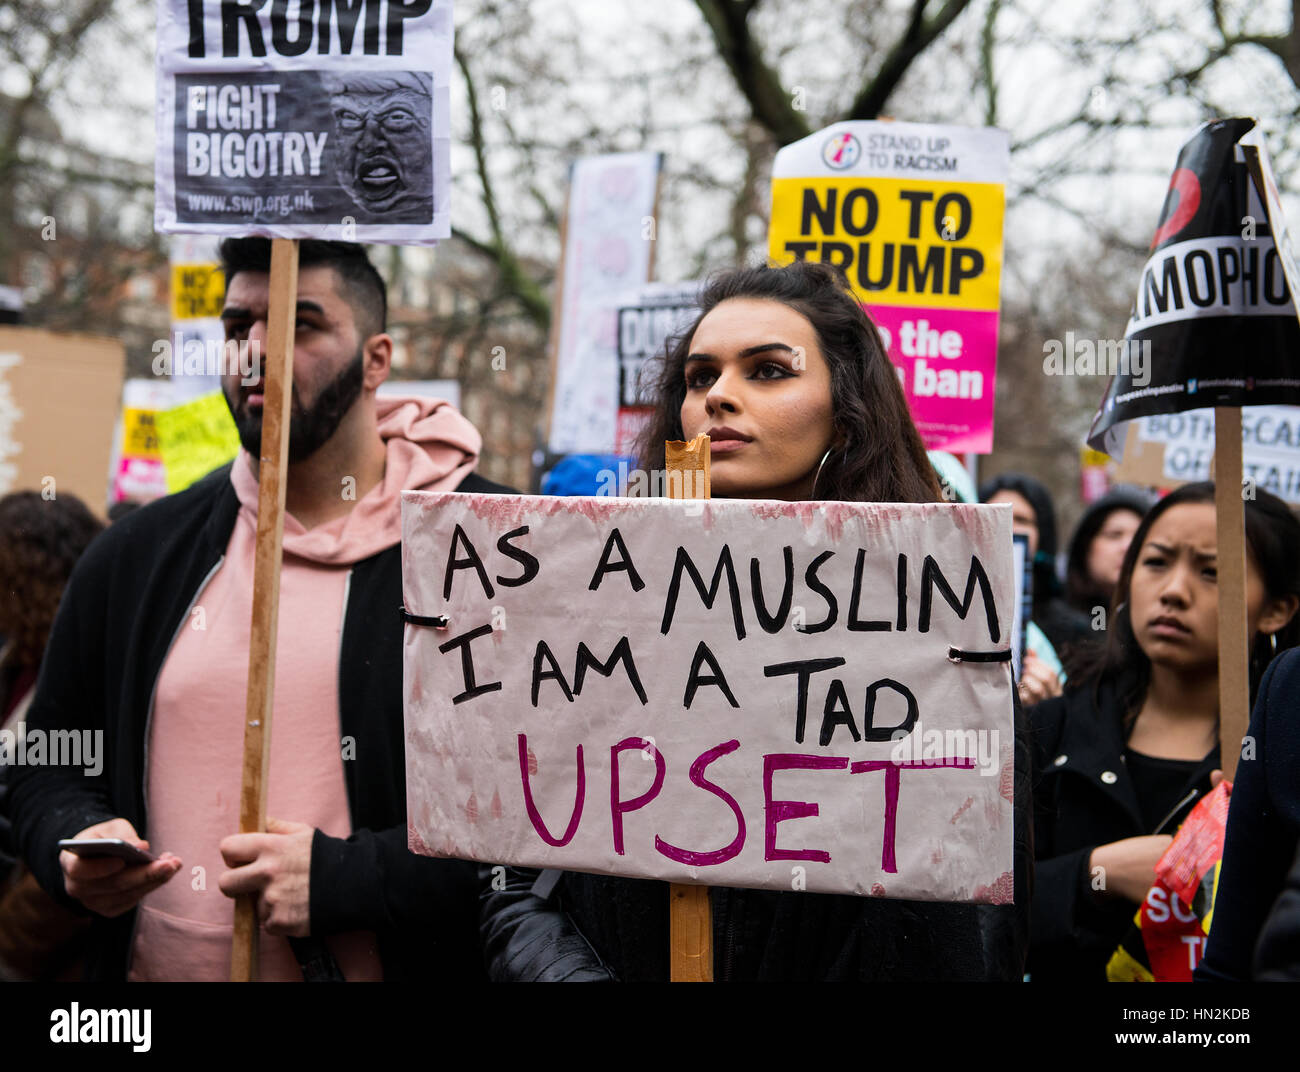 London, UK. 4th February 2017. Stop Trump's Muslim Ban rally - Thousands march through London in protest of President Donald Trump's muslim travel ban Stock Photo